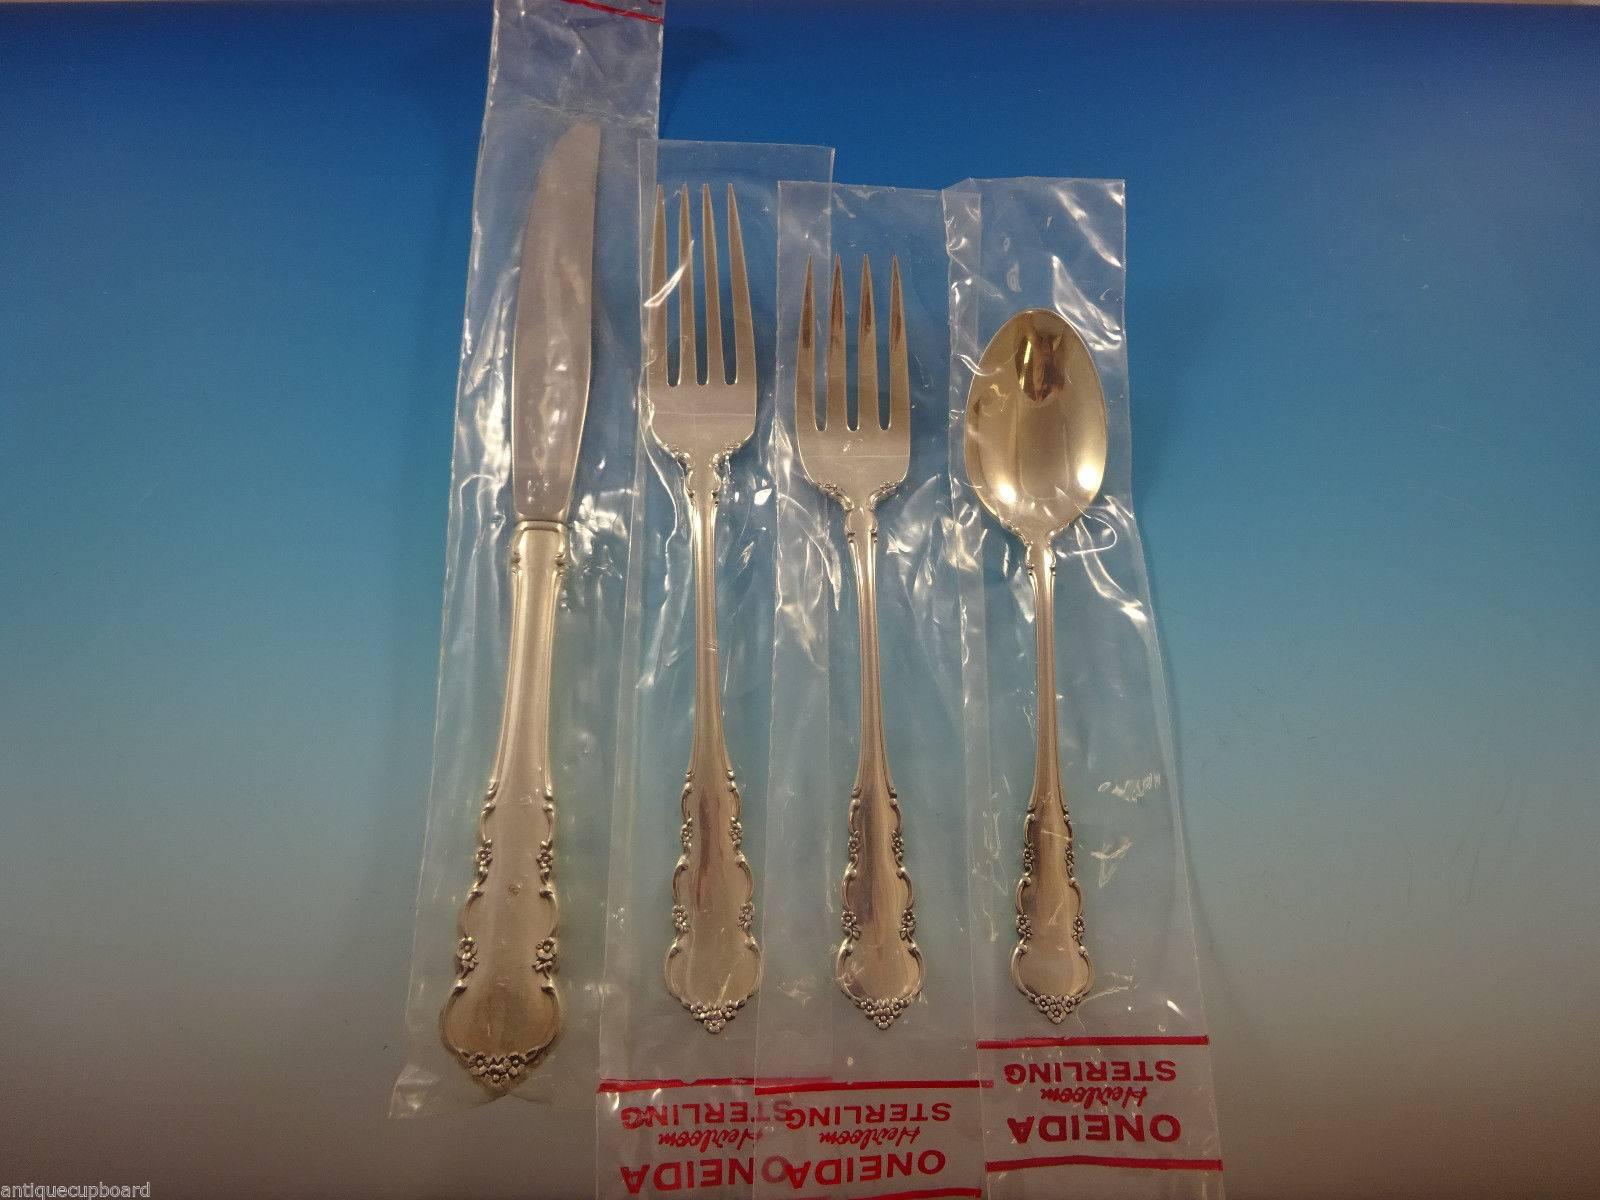 Beautiful new Martinique by Oneida sterling silver flatware set of 37 pieces. The pieces are unused and still in the factory sleeves! This set includes:

Eight knives, 9